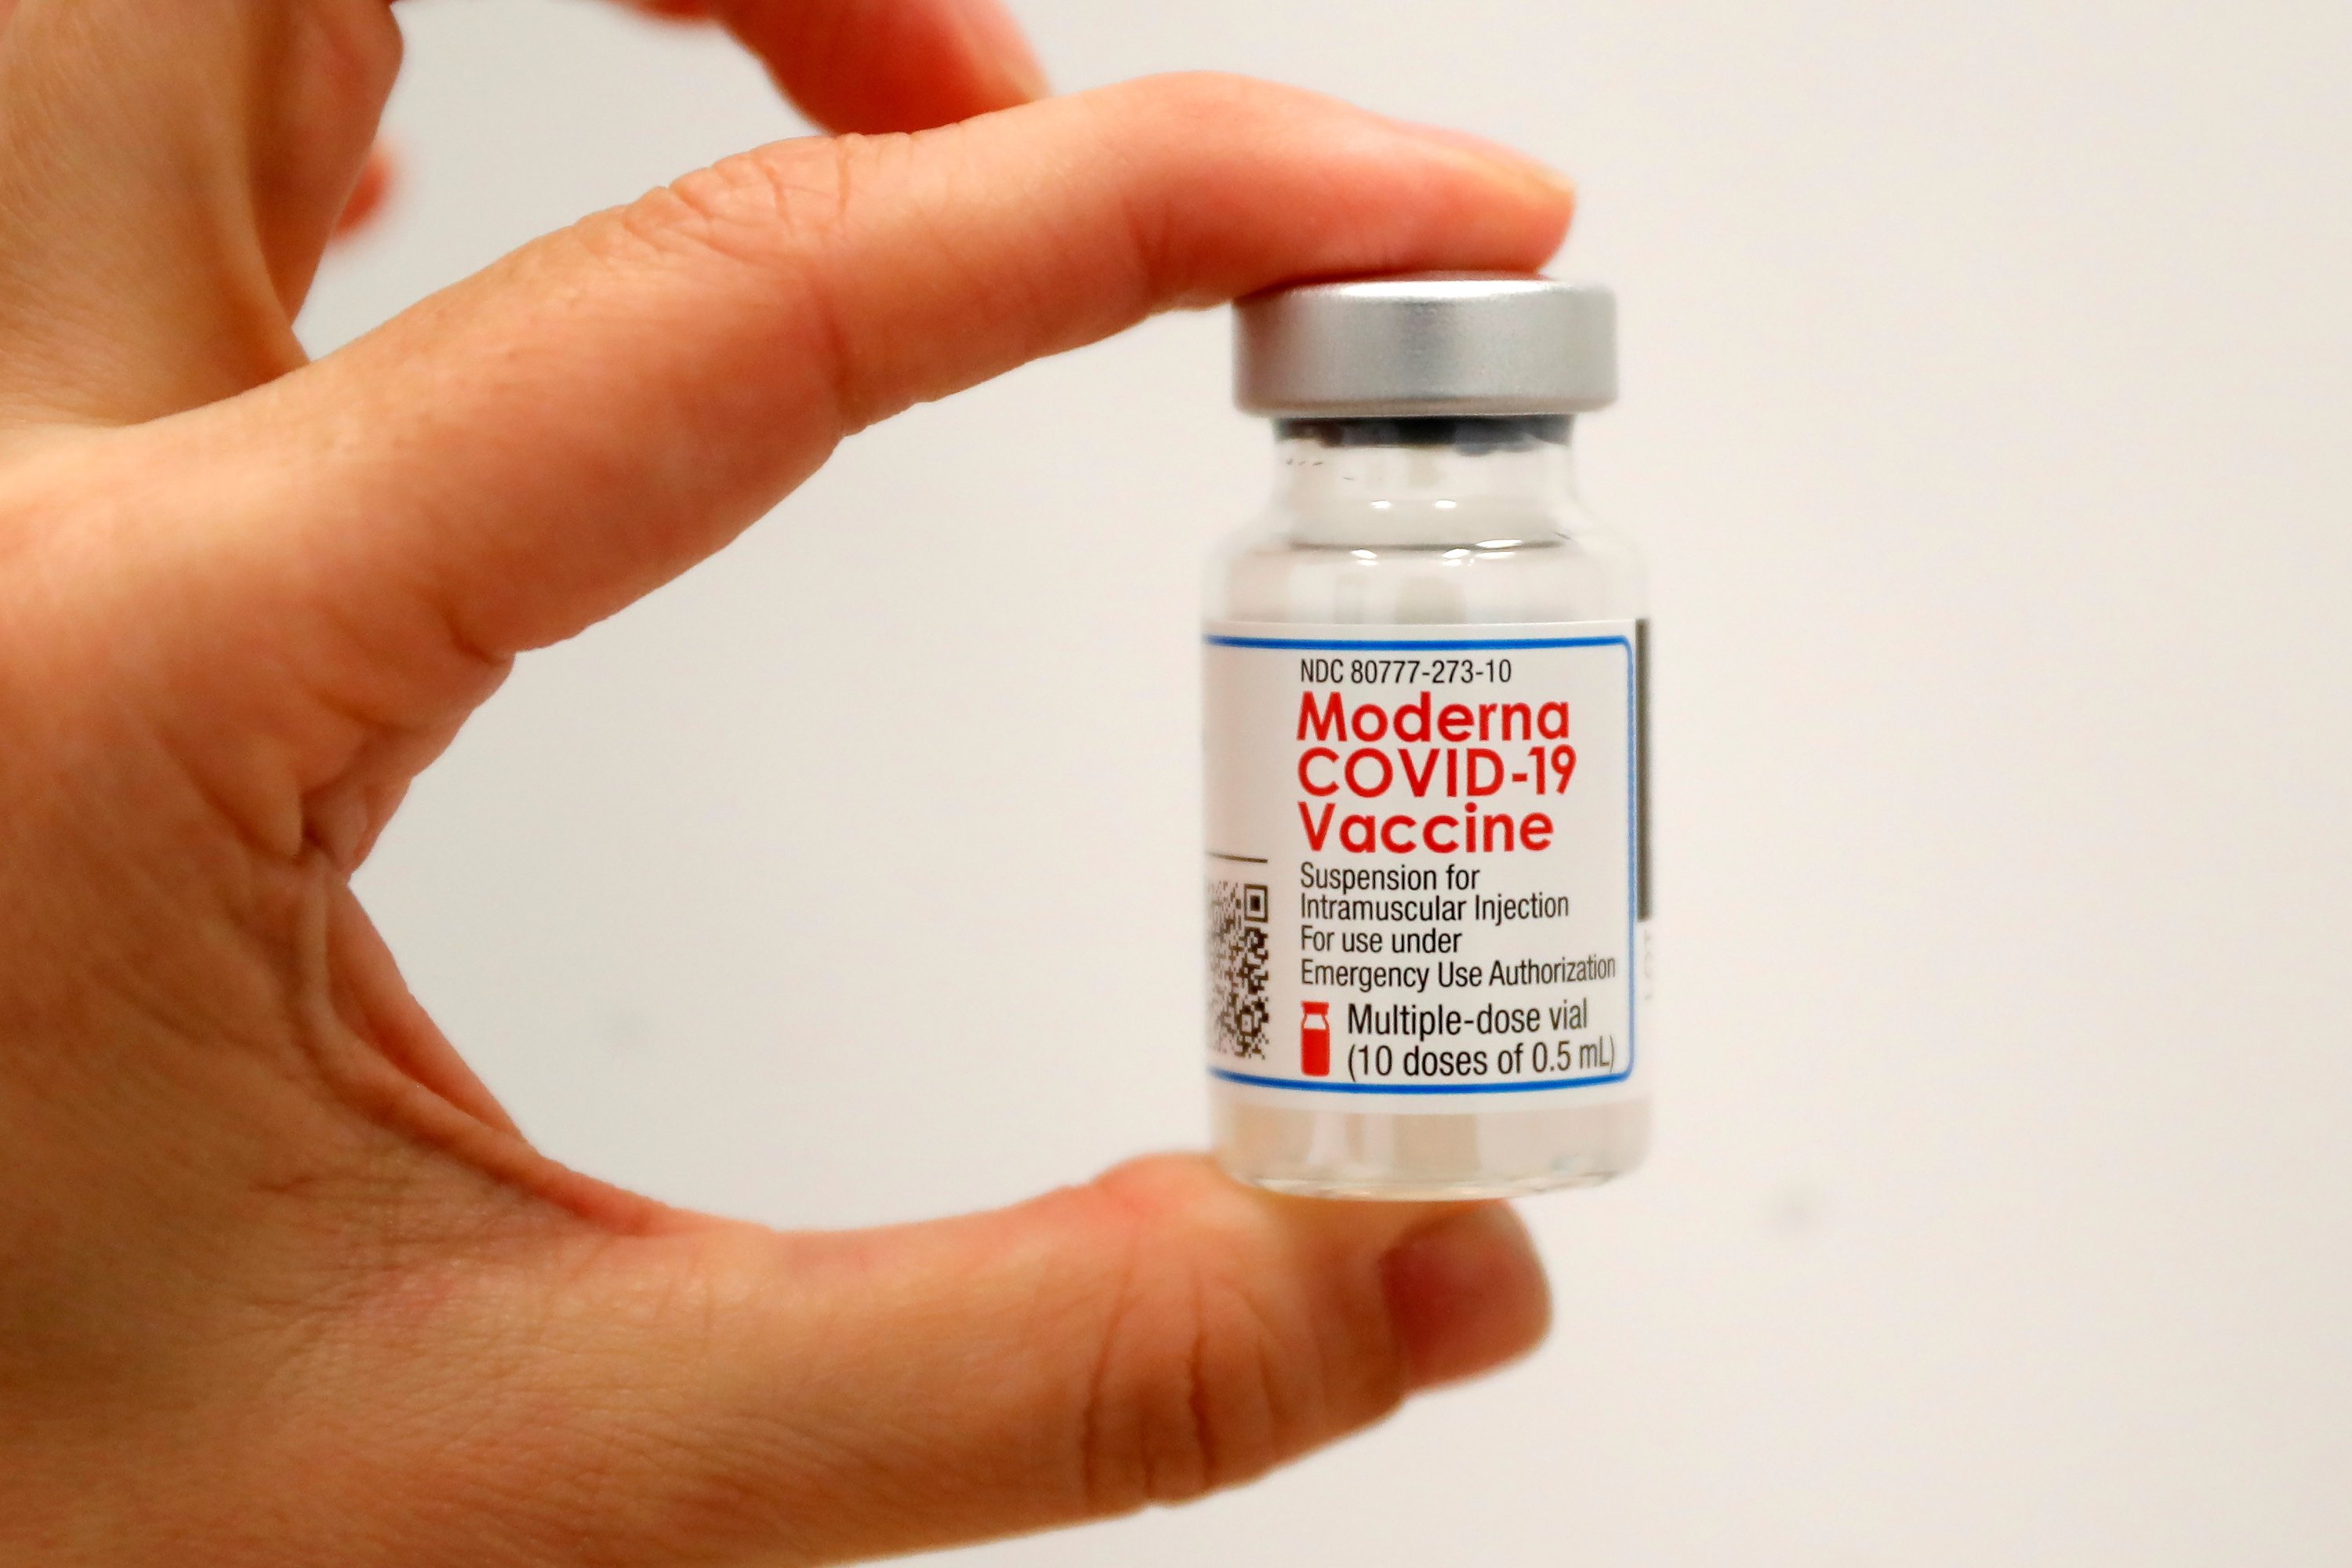 A health care worker holds a vial of the Moderna COVID-19 vaccine at a pop-up vaccination site operated by SOMOS Community Care during the COVID-19 pandemic in Manhattan, New York City, New York, U.S., Jan. 29, 2021. (Reuters Photo)